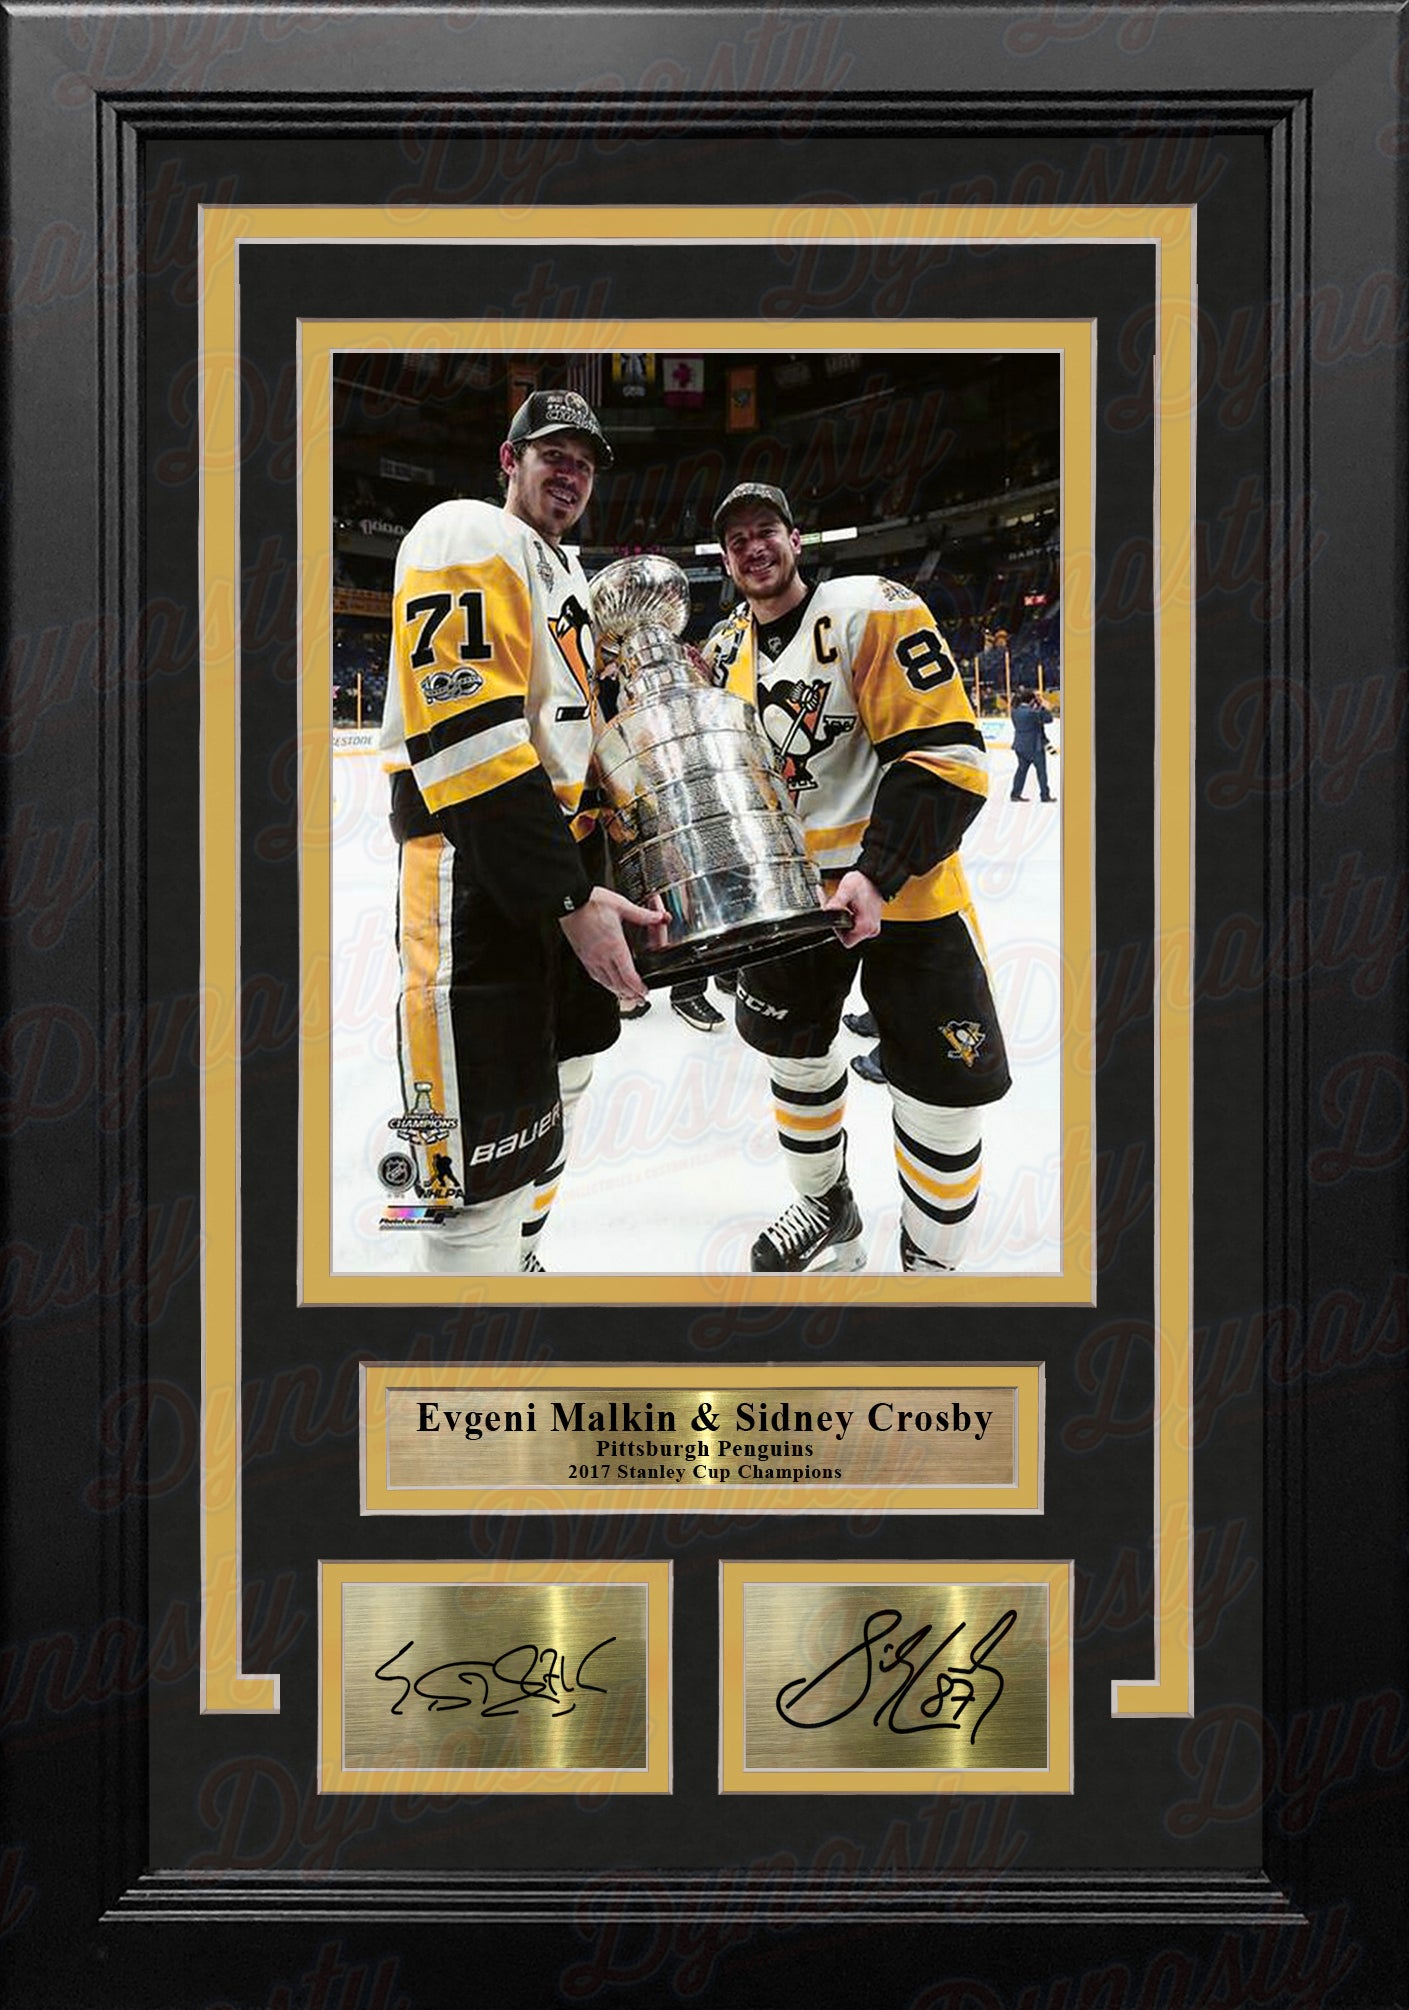 Evgeni Malkin & Sidney Crosby Stanley Cup Pittsburgh Penguins 8x10 Framed Photo Engraved Autographs - Dynasty Sports & Framing 